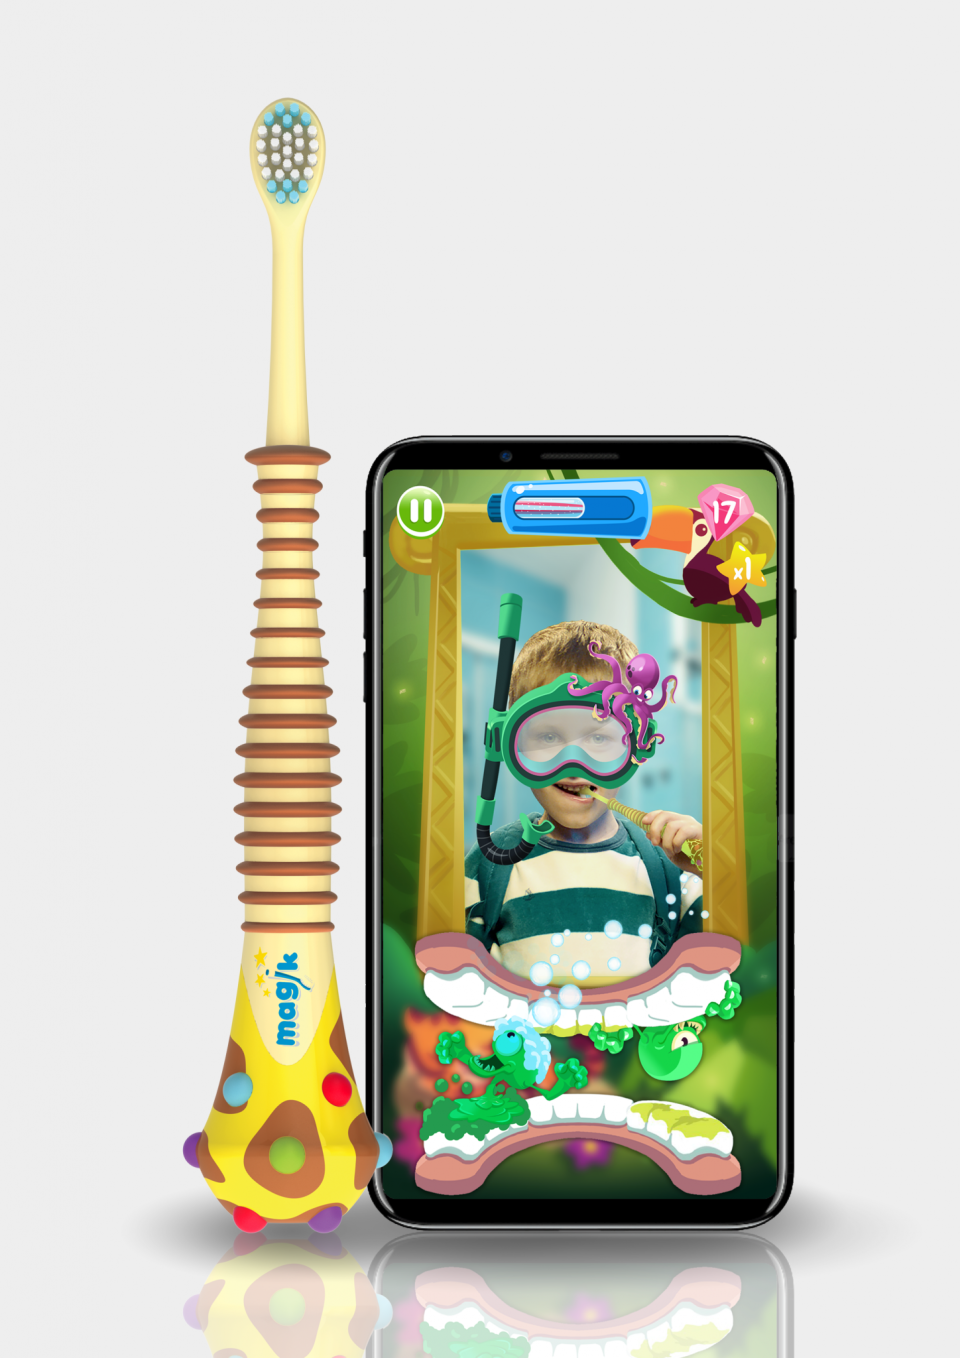 Kolibree's augmented reality Magik toothbrush was shown at CES 2018